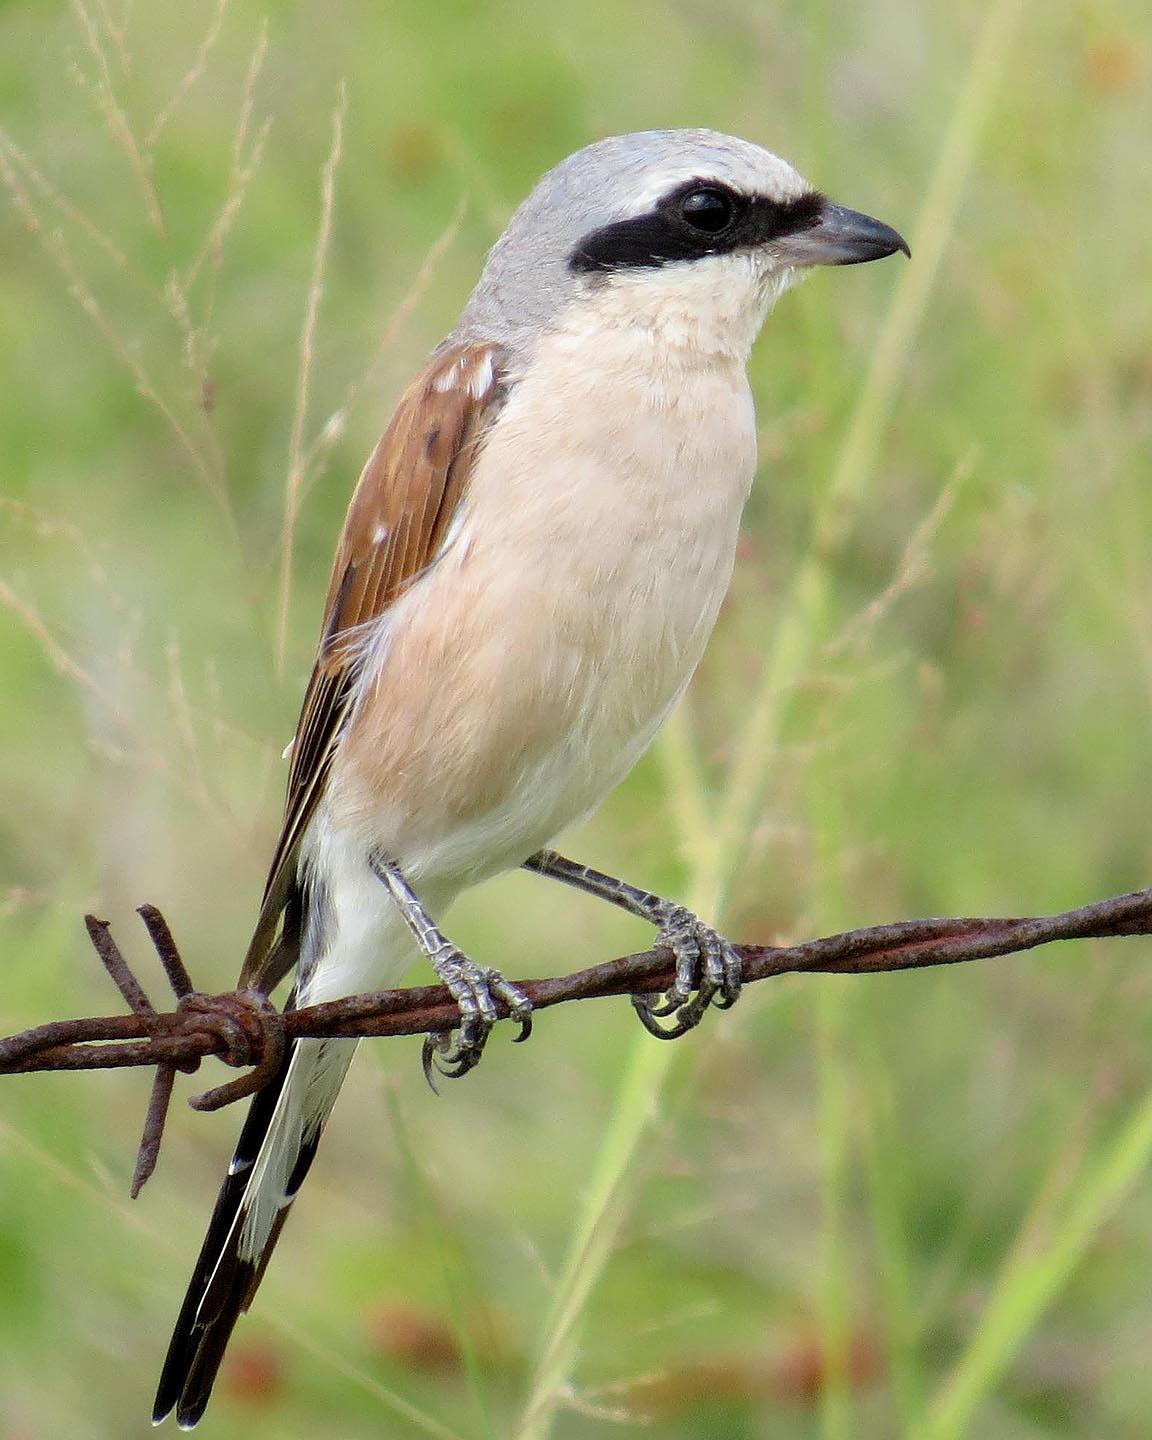 Red-backed Shrike Photo by Peter Boesman